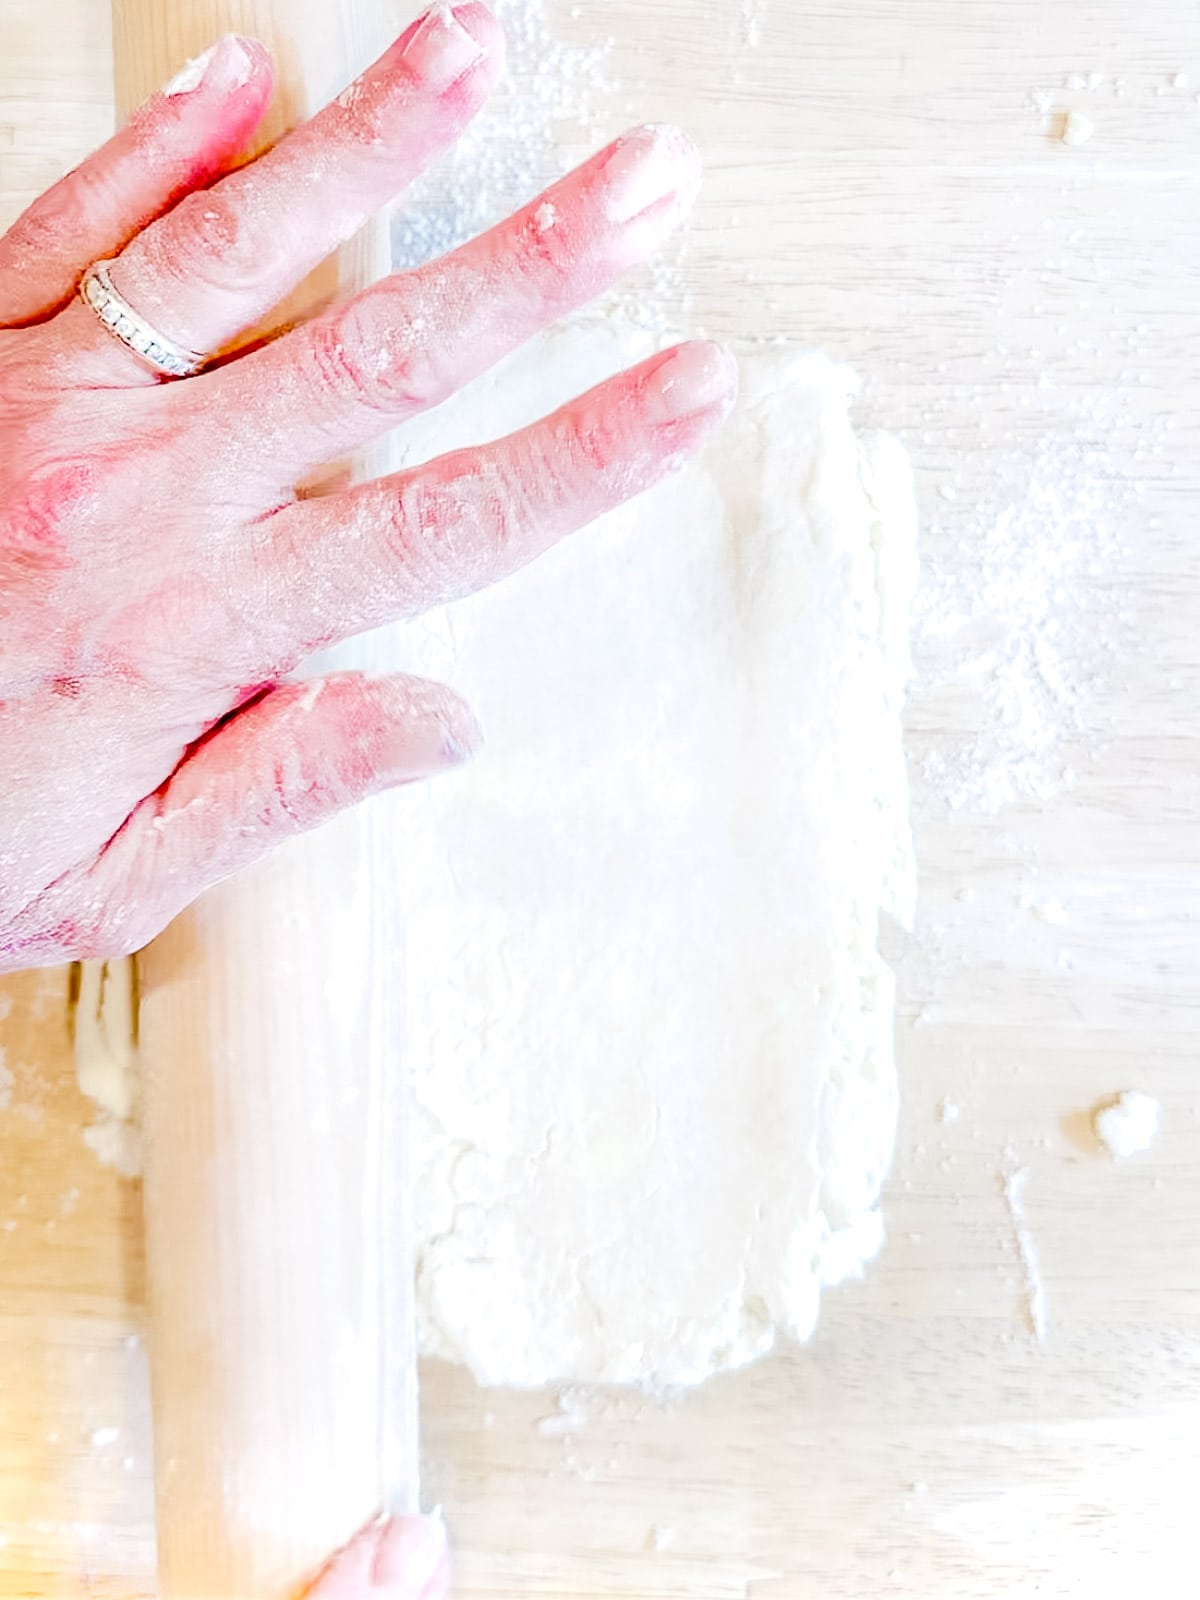 Rolling out biscuit dough.